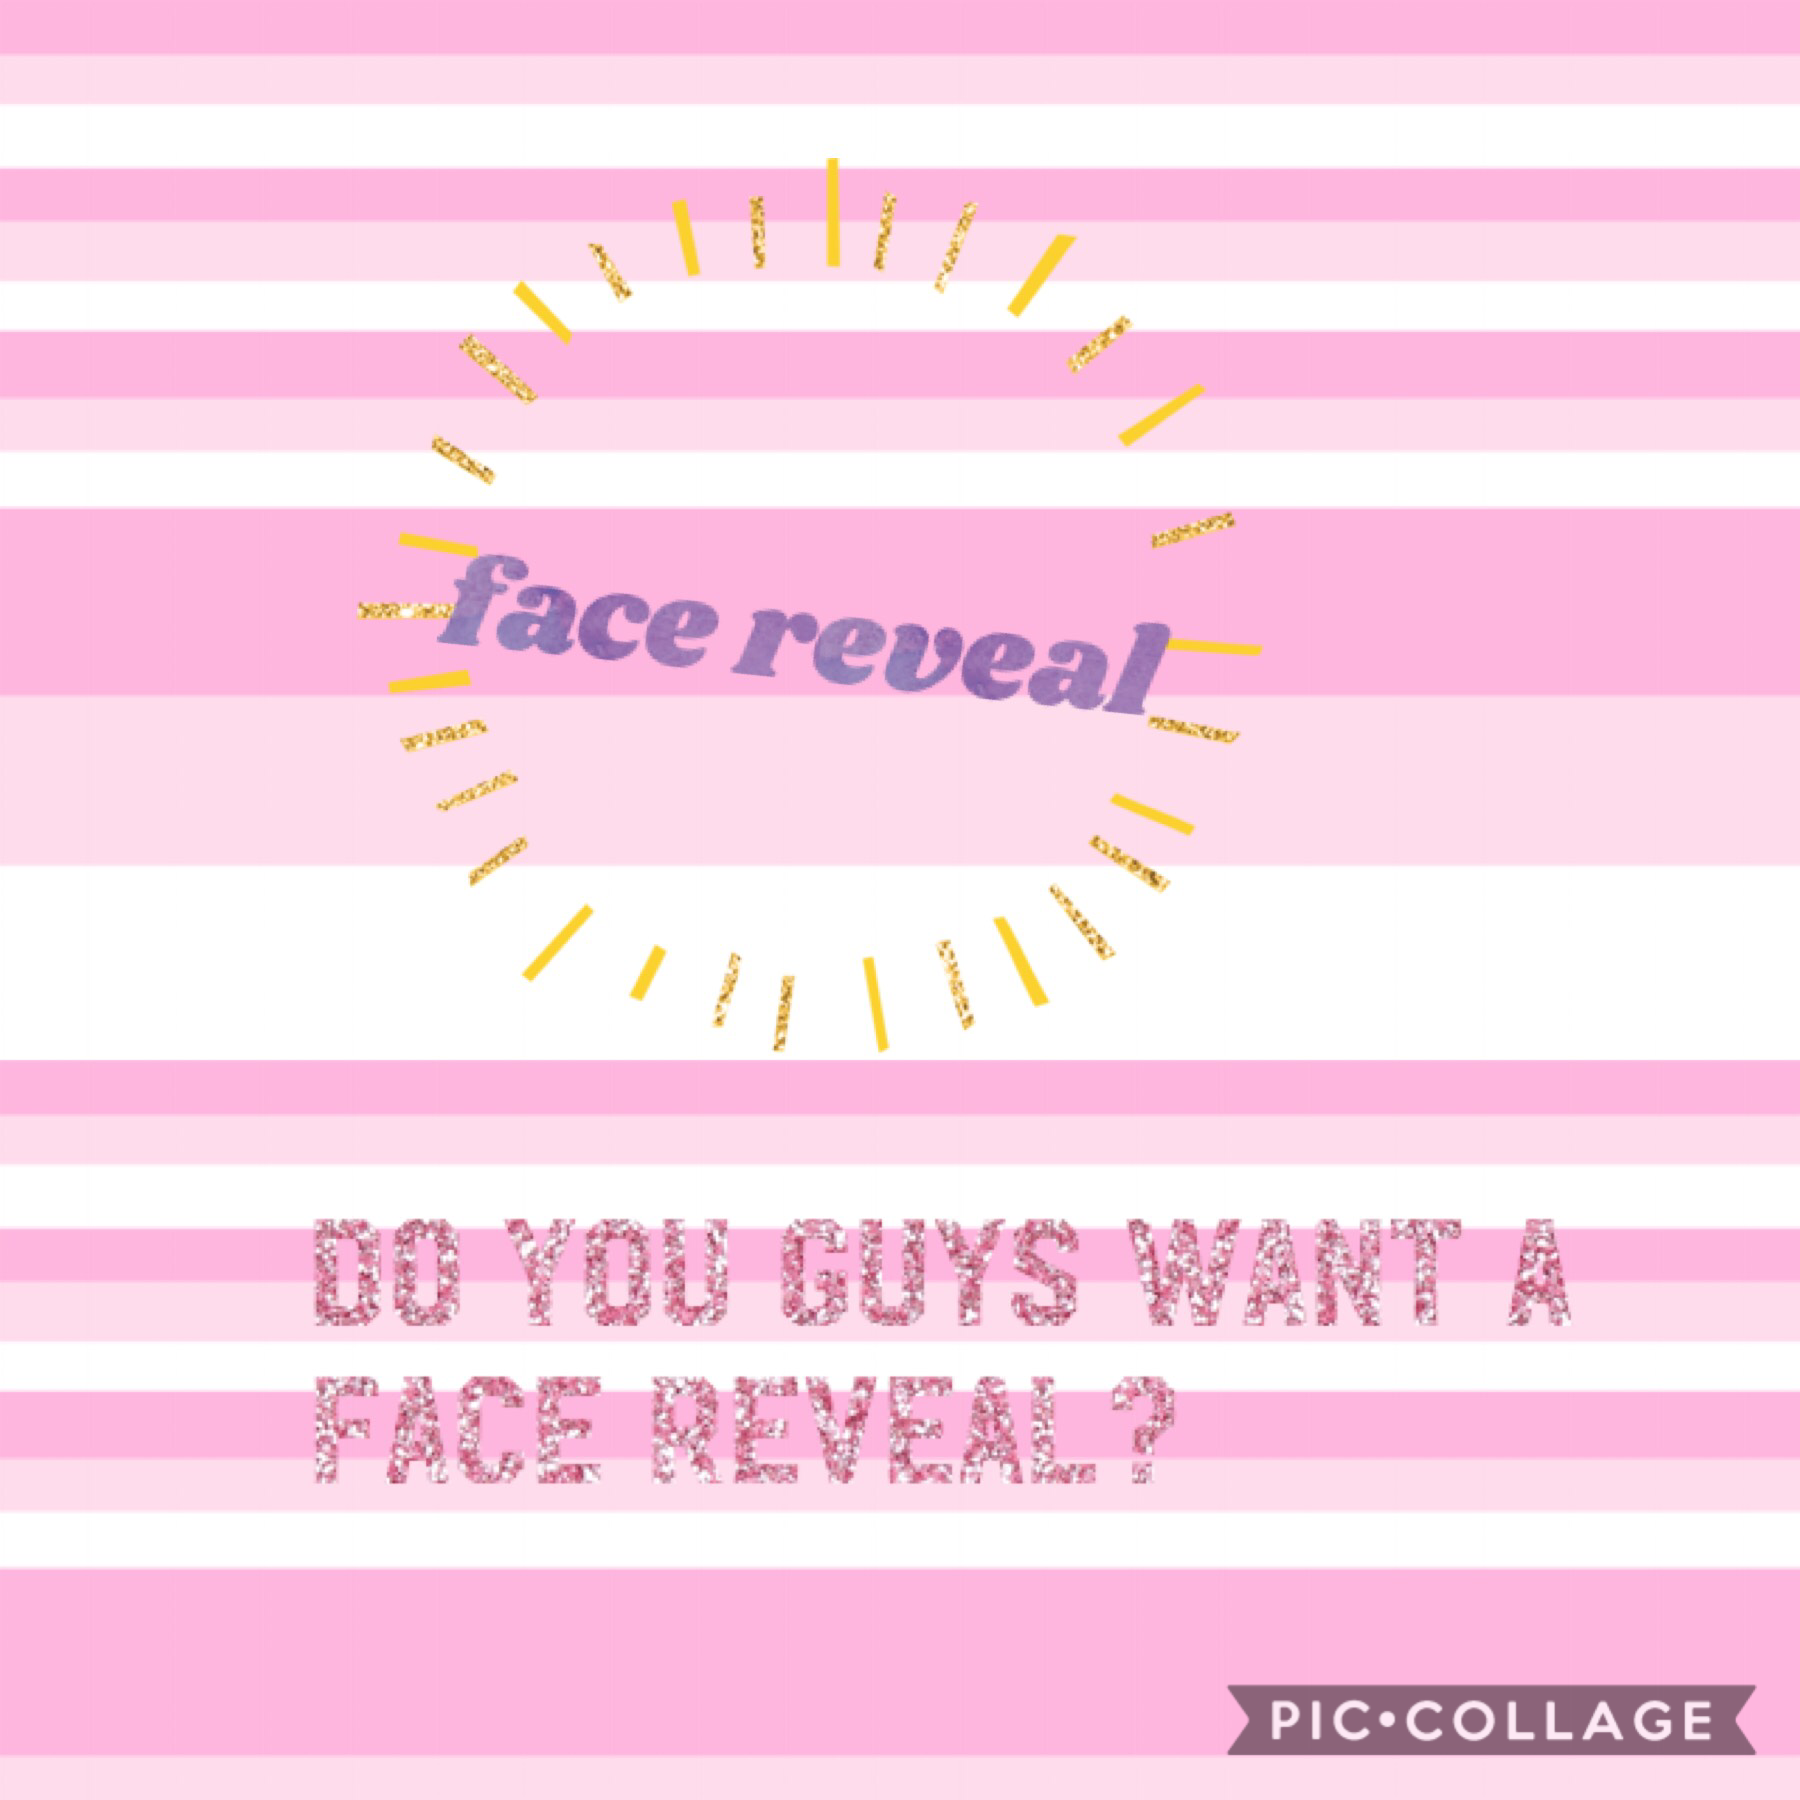 do you guys want me to do a face reveal?